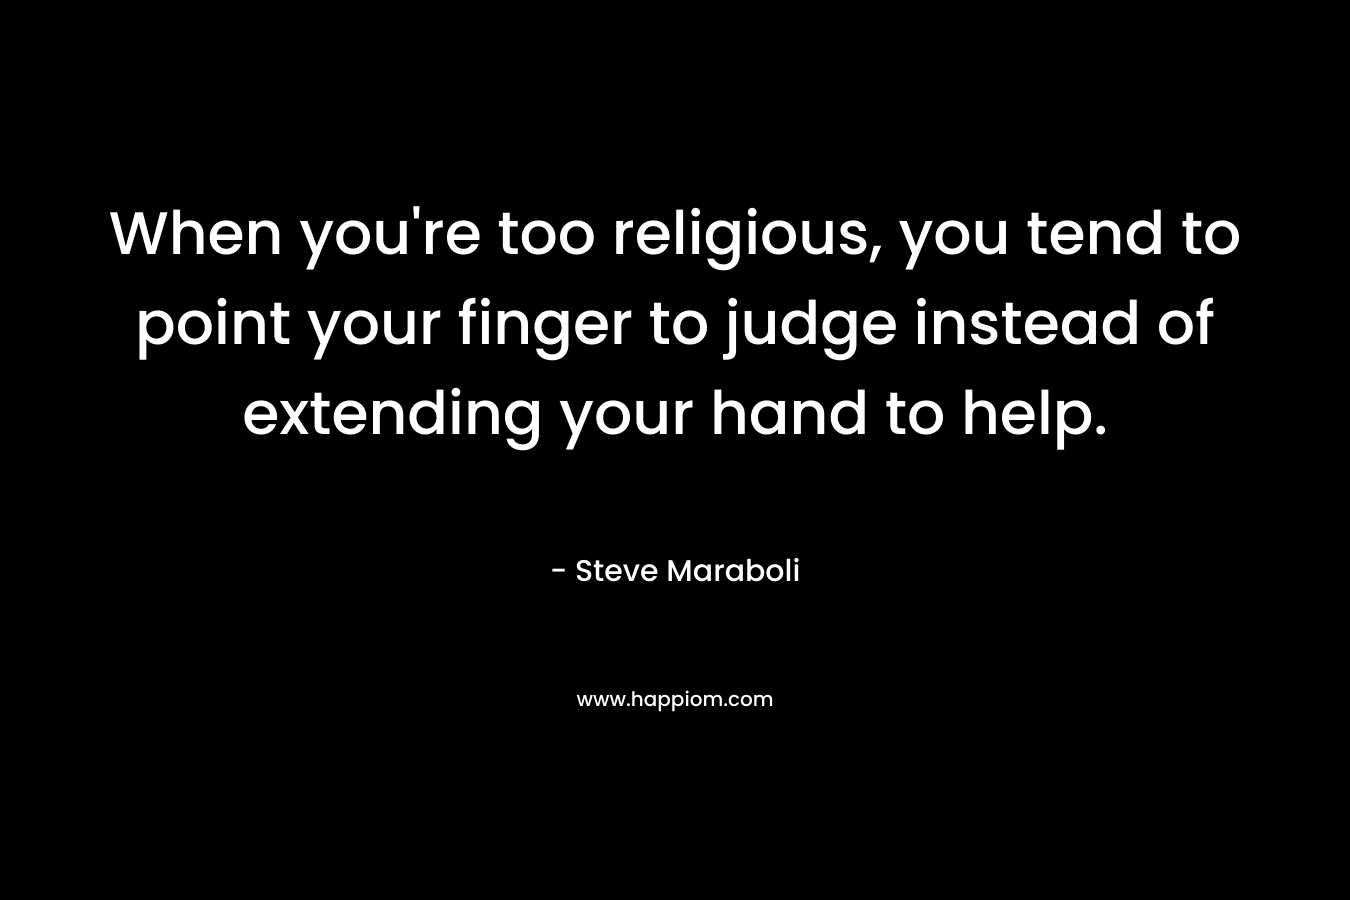 When you're too religious, you tend to point your finger to judge instead of extending your hand to help.